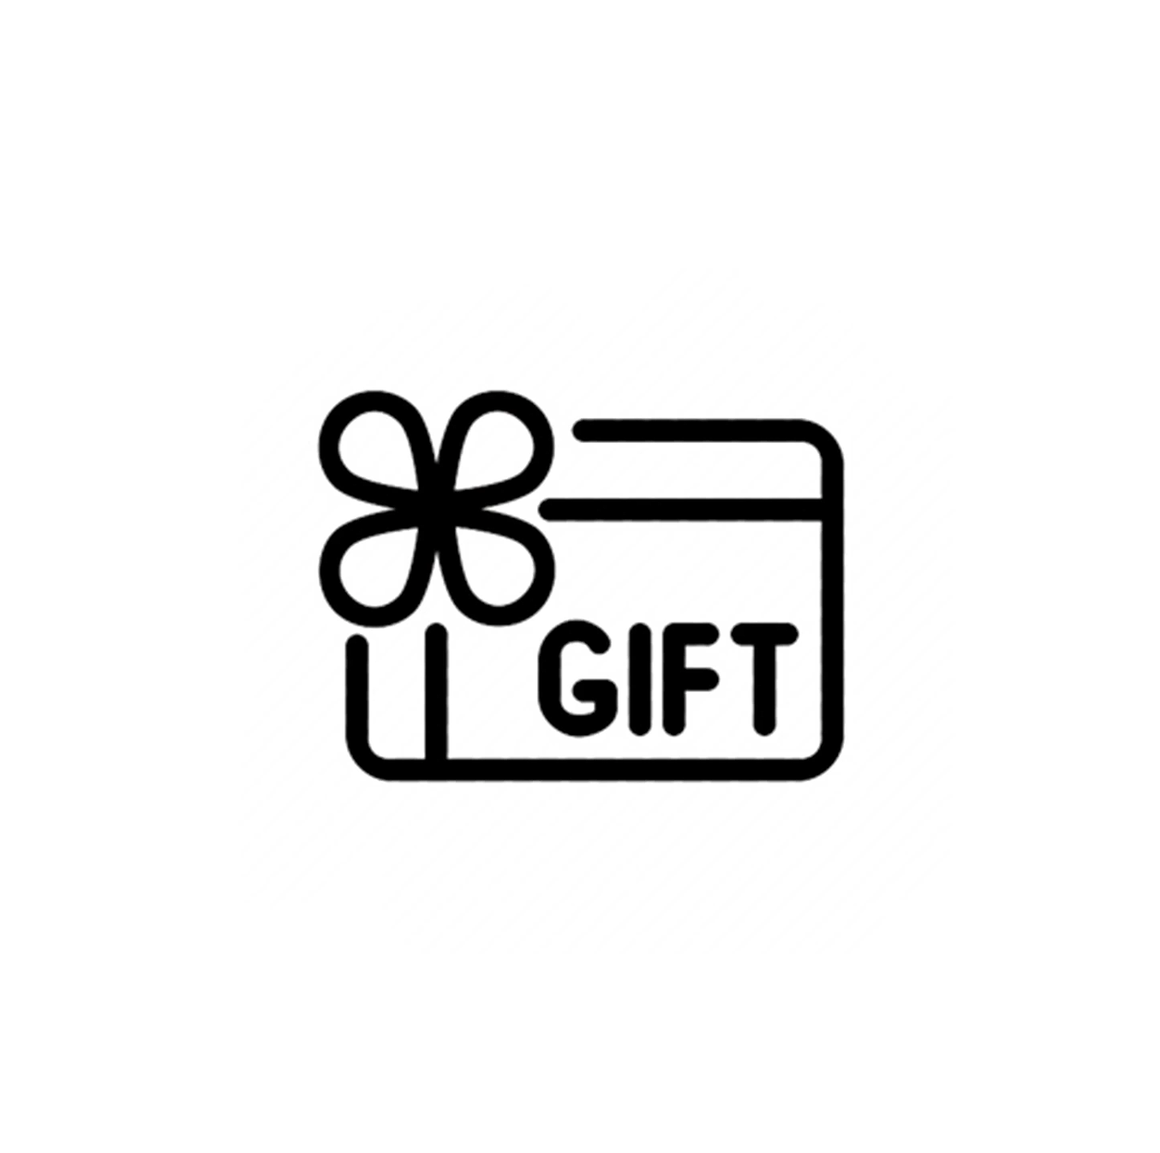 54 FLORAL GIFT CARD